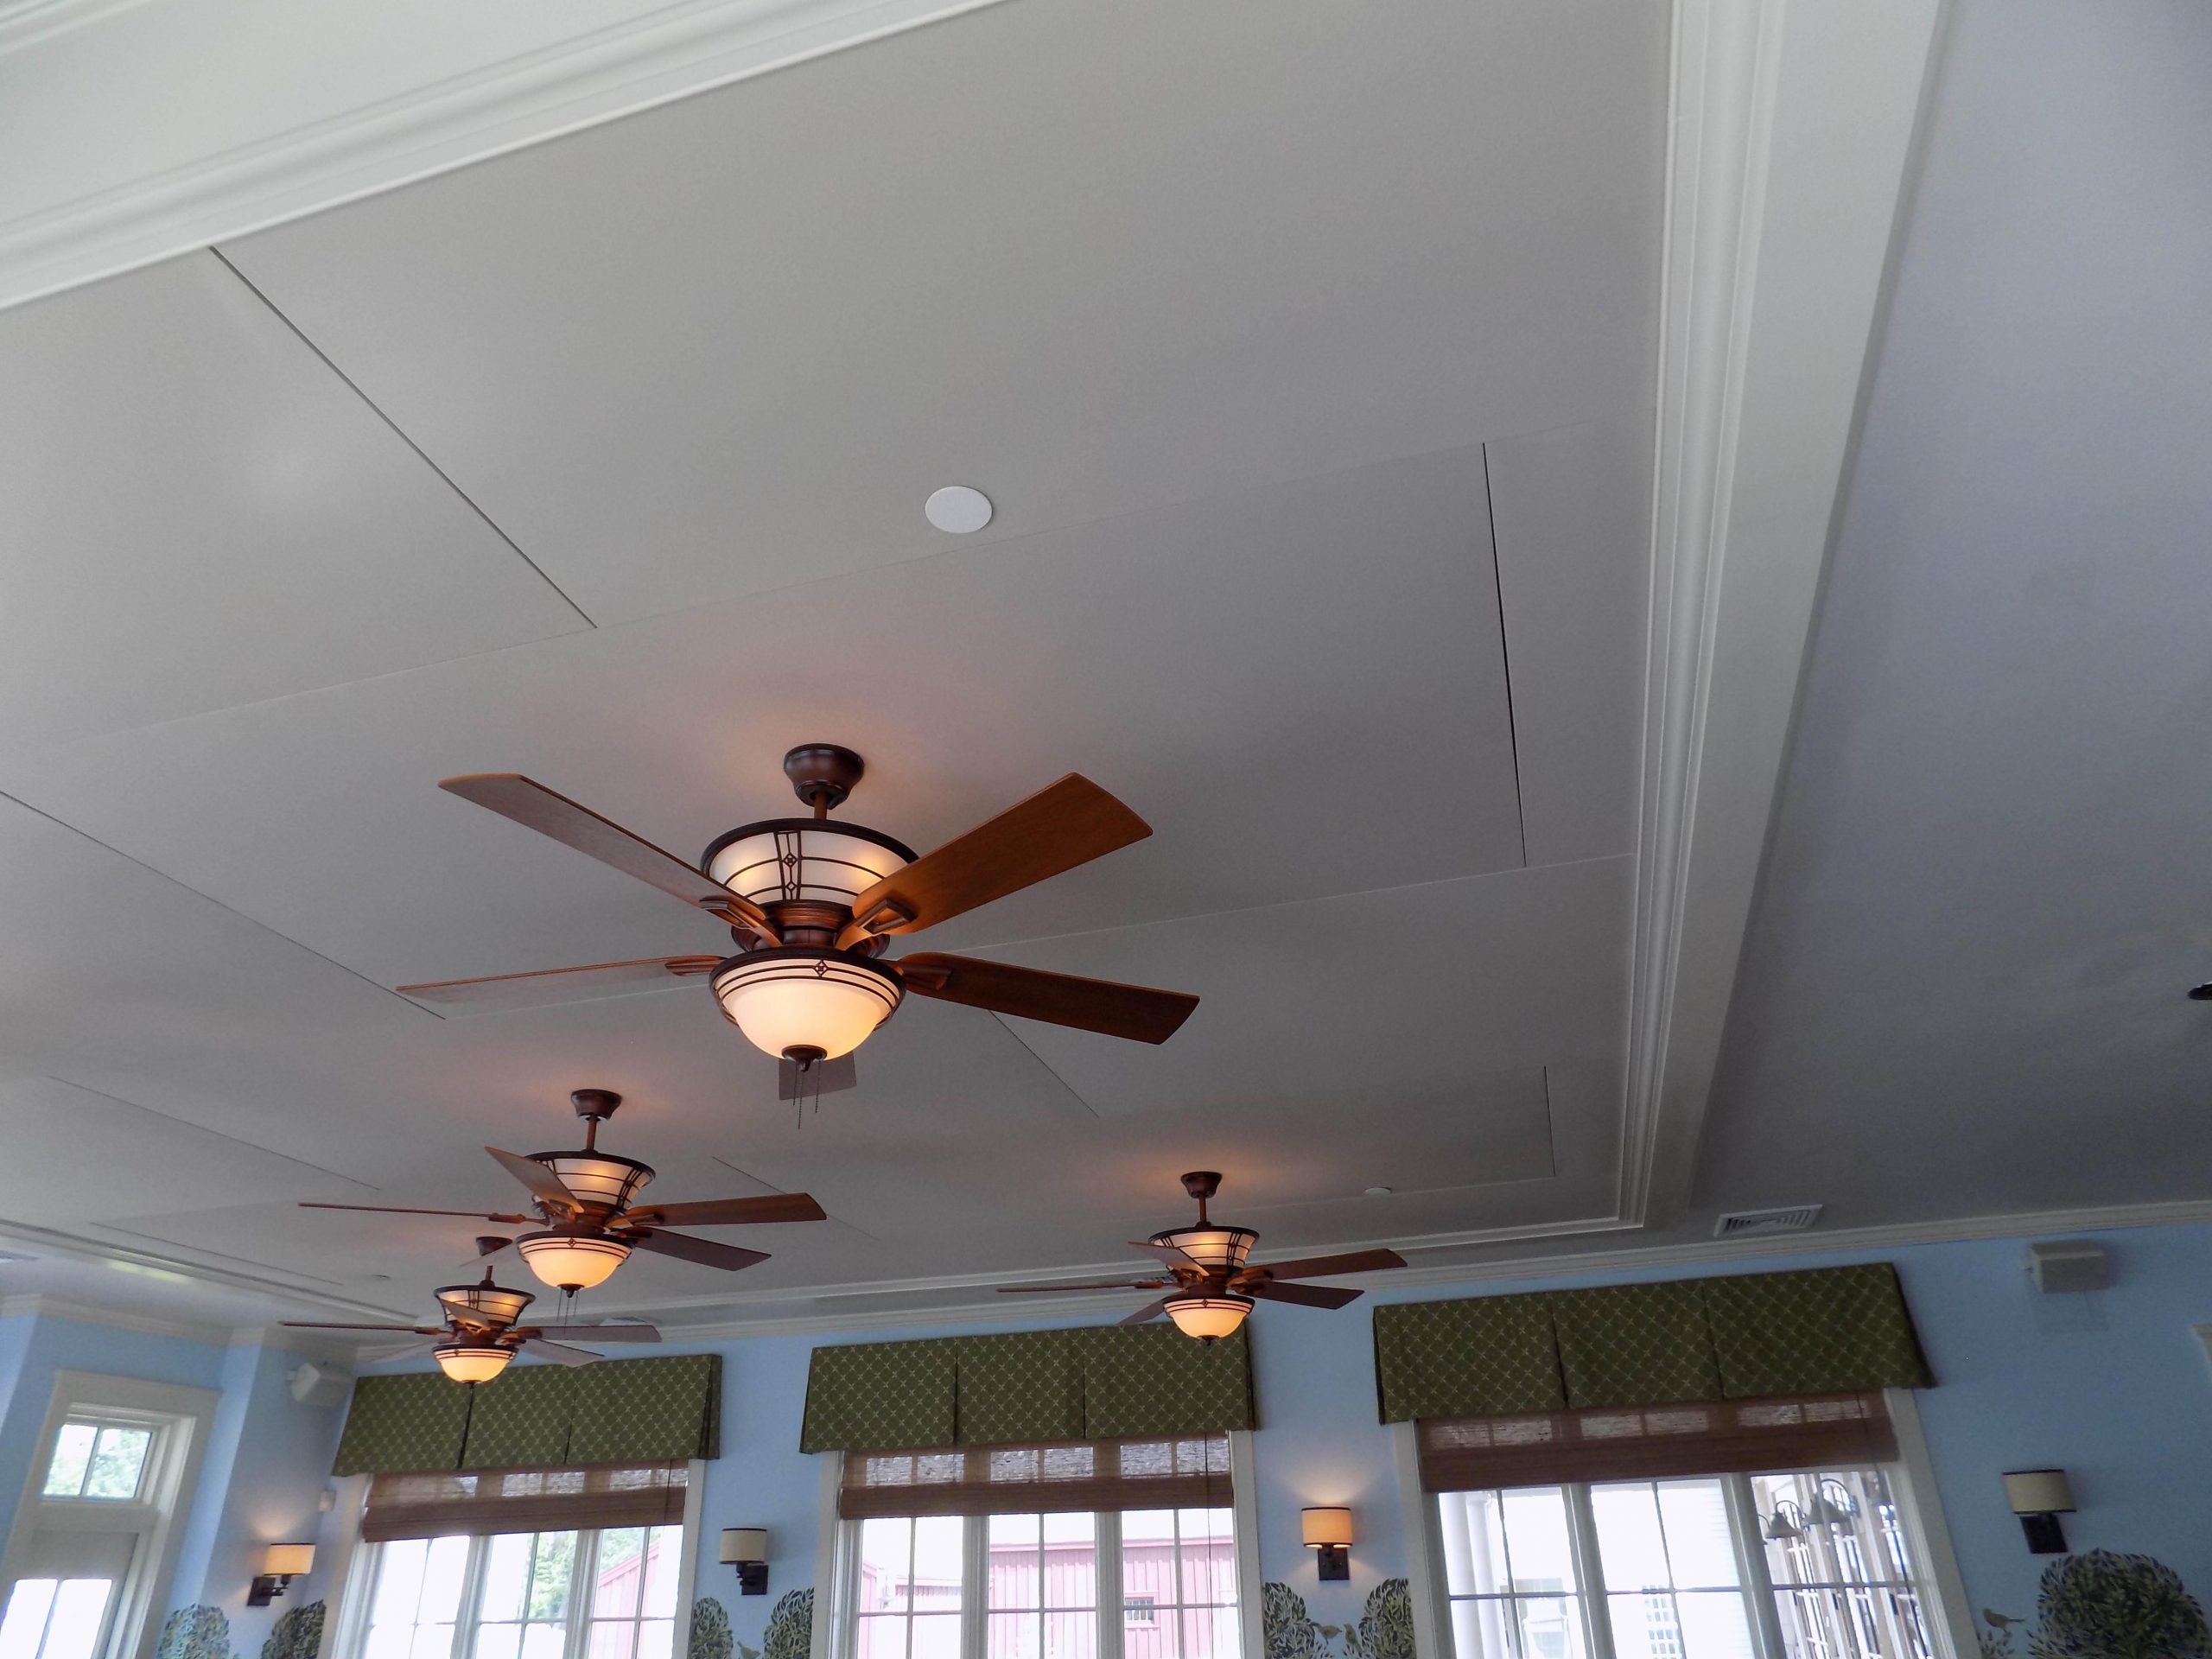 Custom Ceiling Acoustic Panels With Mounting For Lights And Fans pertaining to size 5152 X 3864